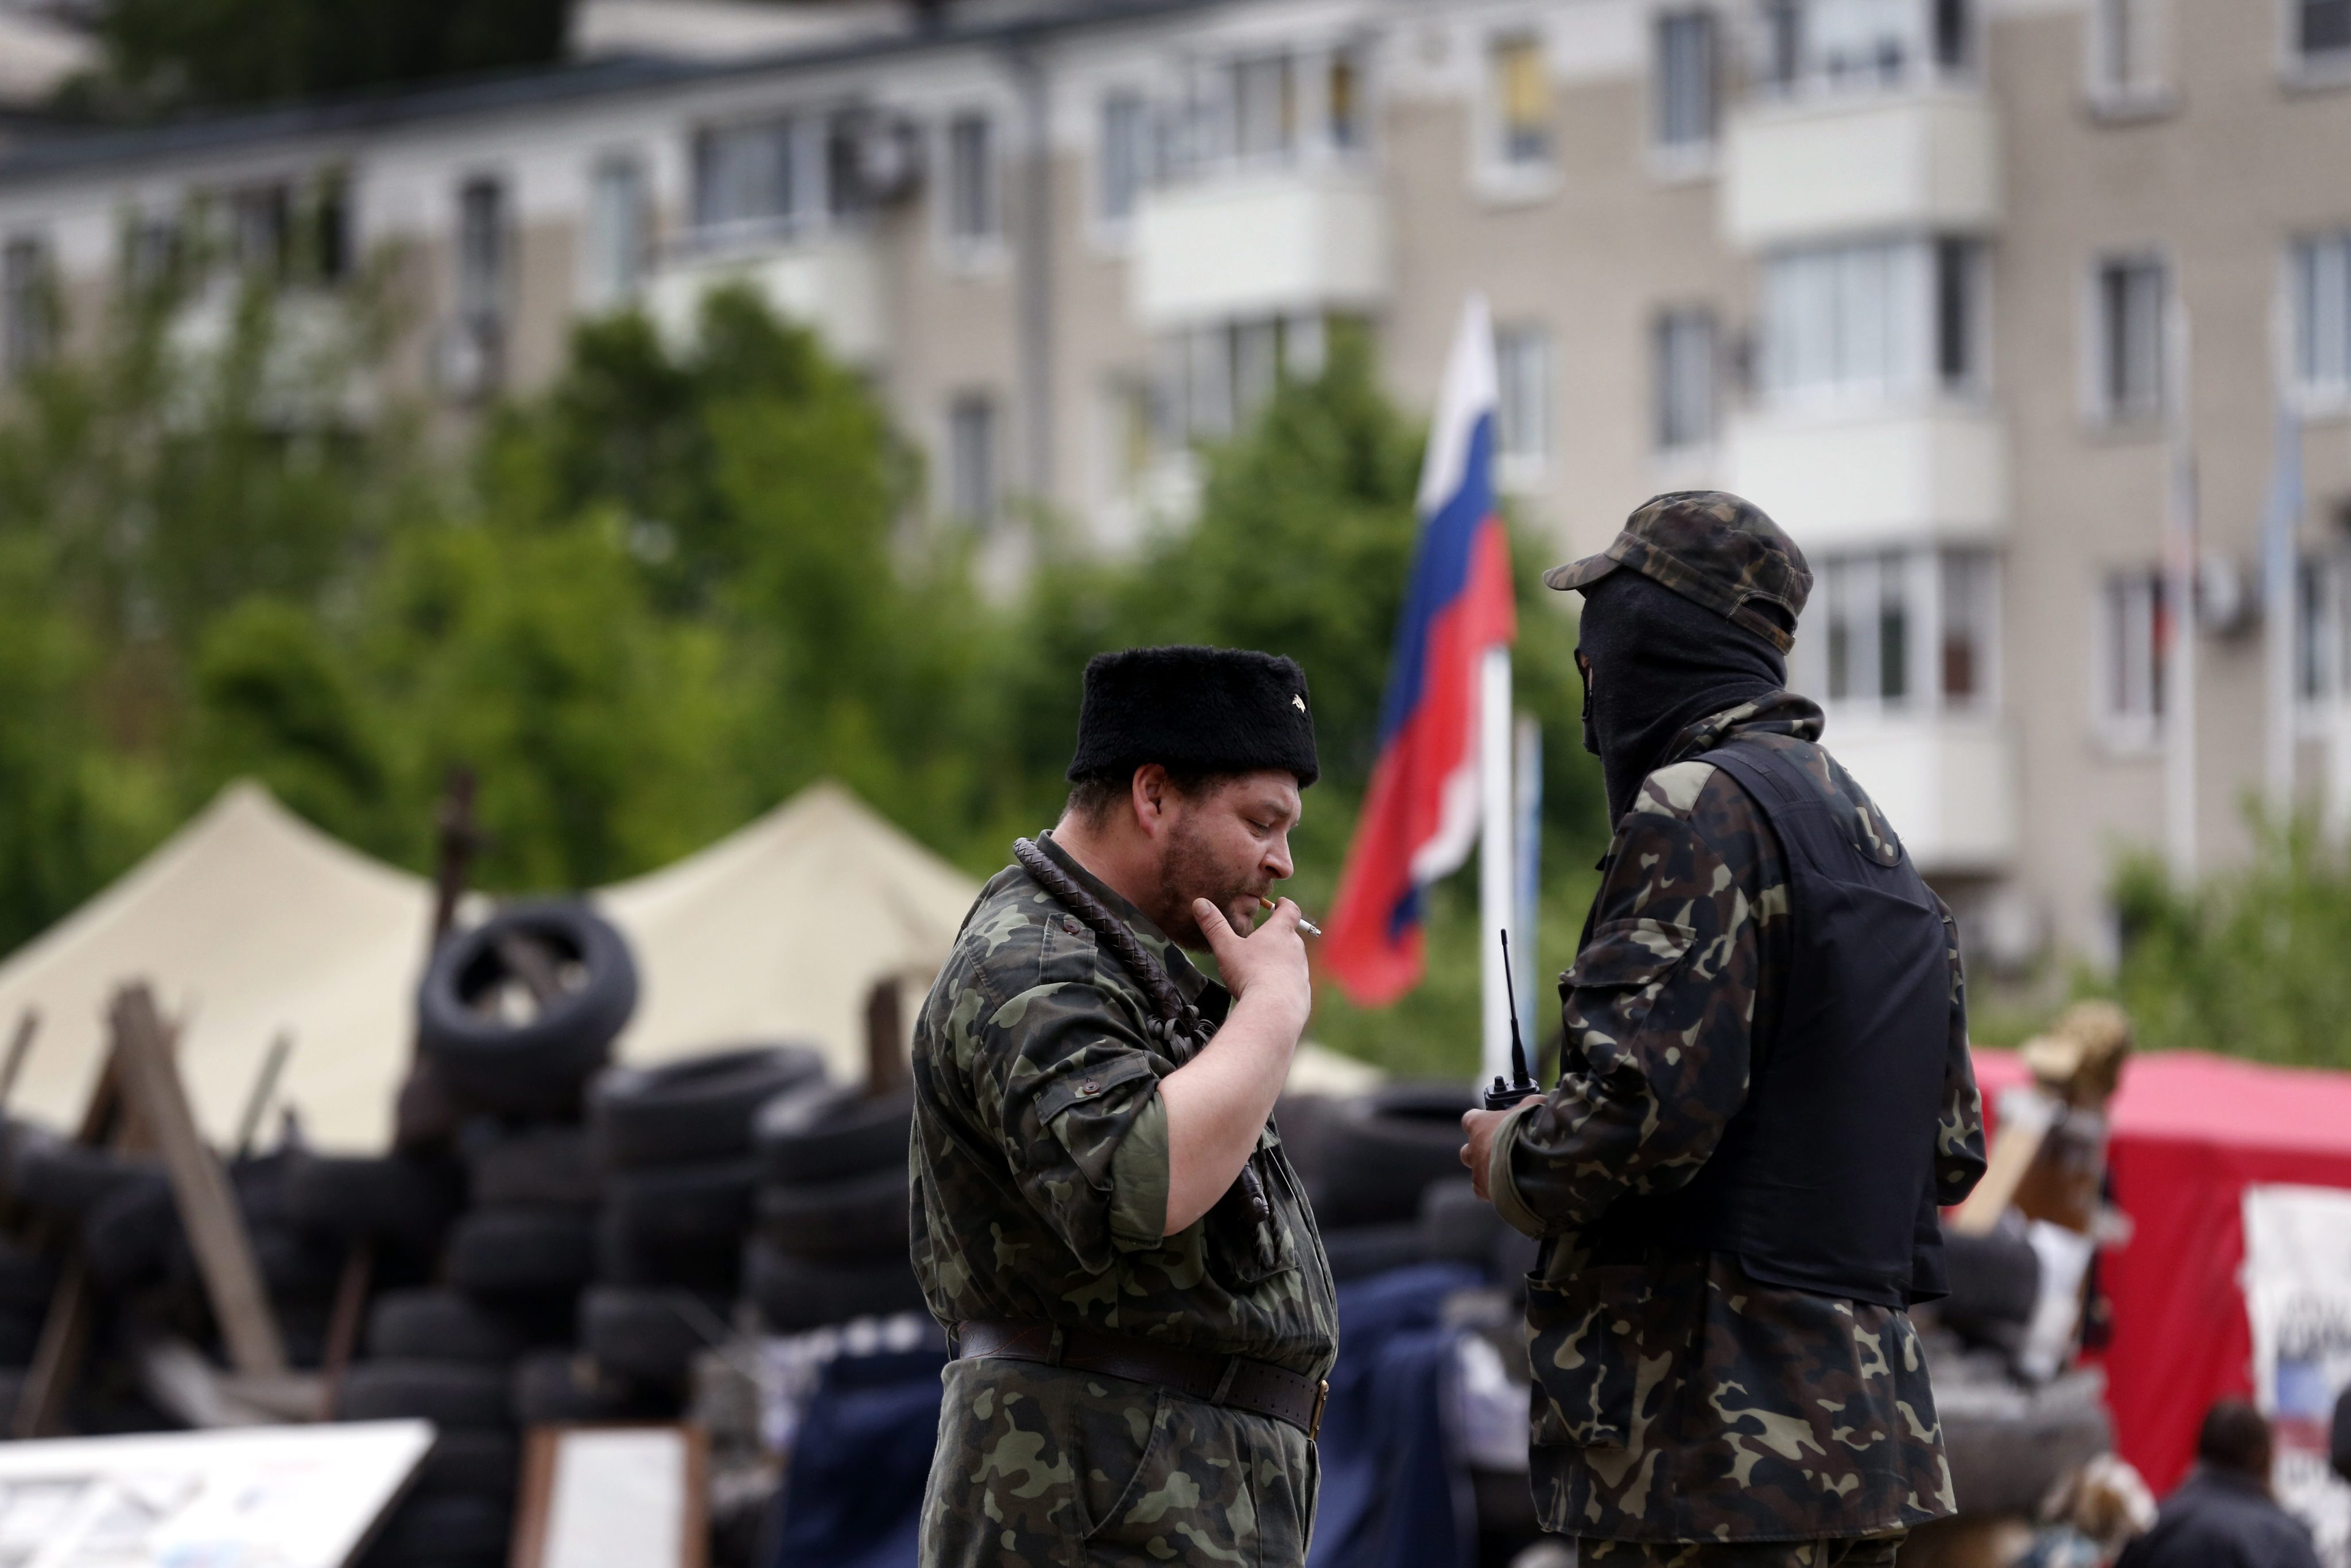 Supporters of the self-declared Donetsk People's Republic stand in front of the occupied regional administration building in Donetsk, Ukraine, May 12, 2014. (Photo: Maxim Shipenkov/Newscom)